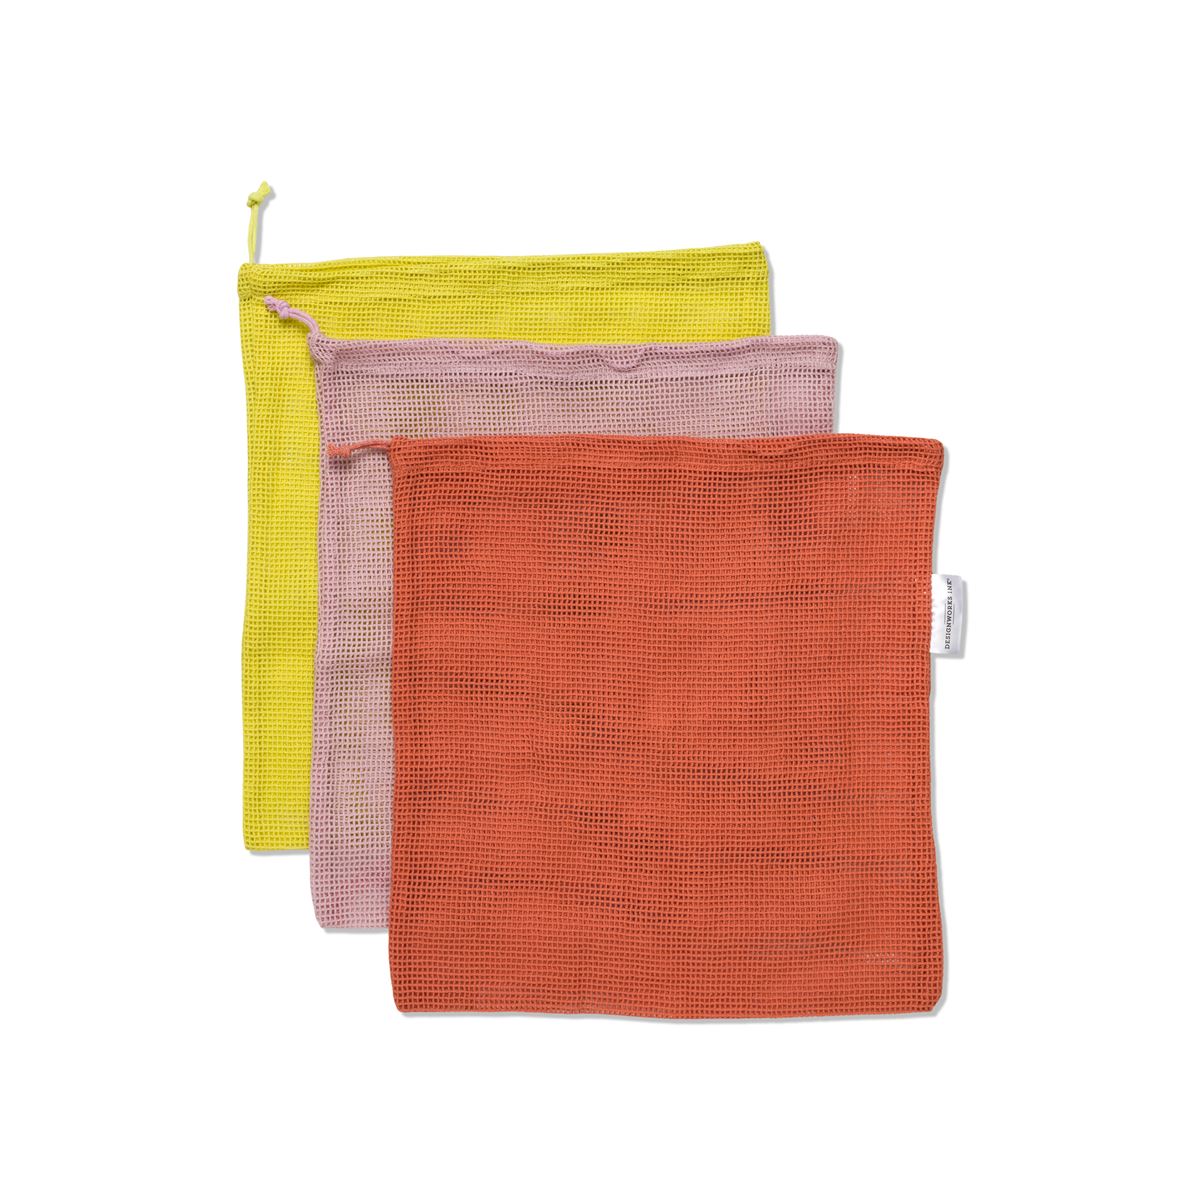 Reusable Product Bags, High Noon General Store